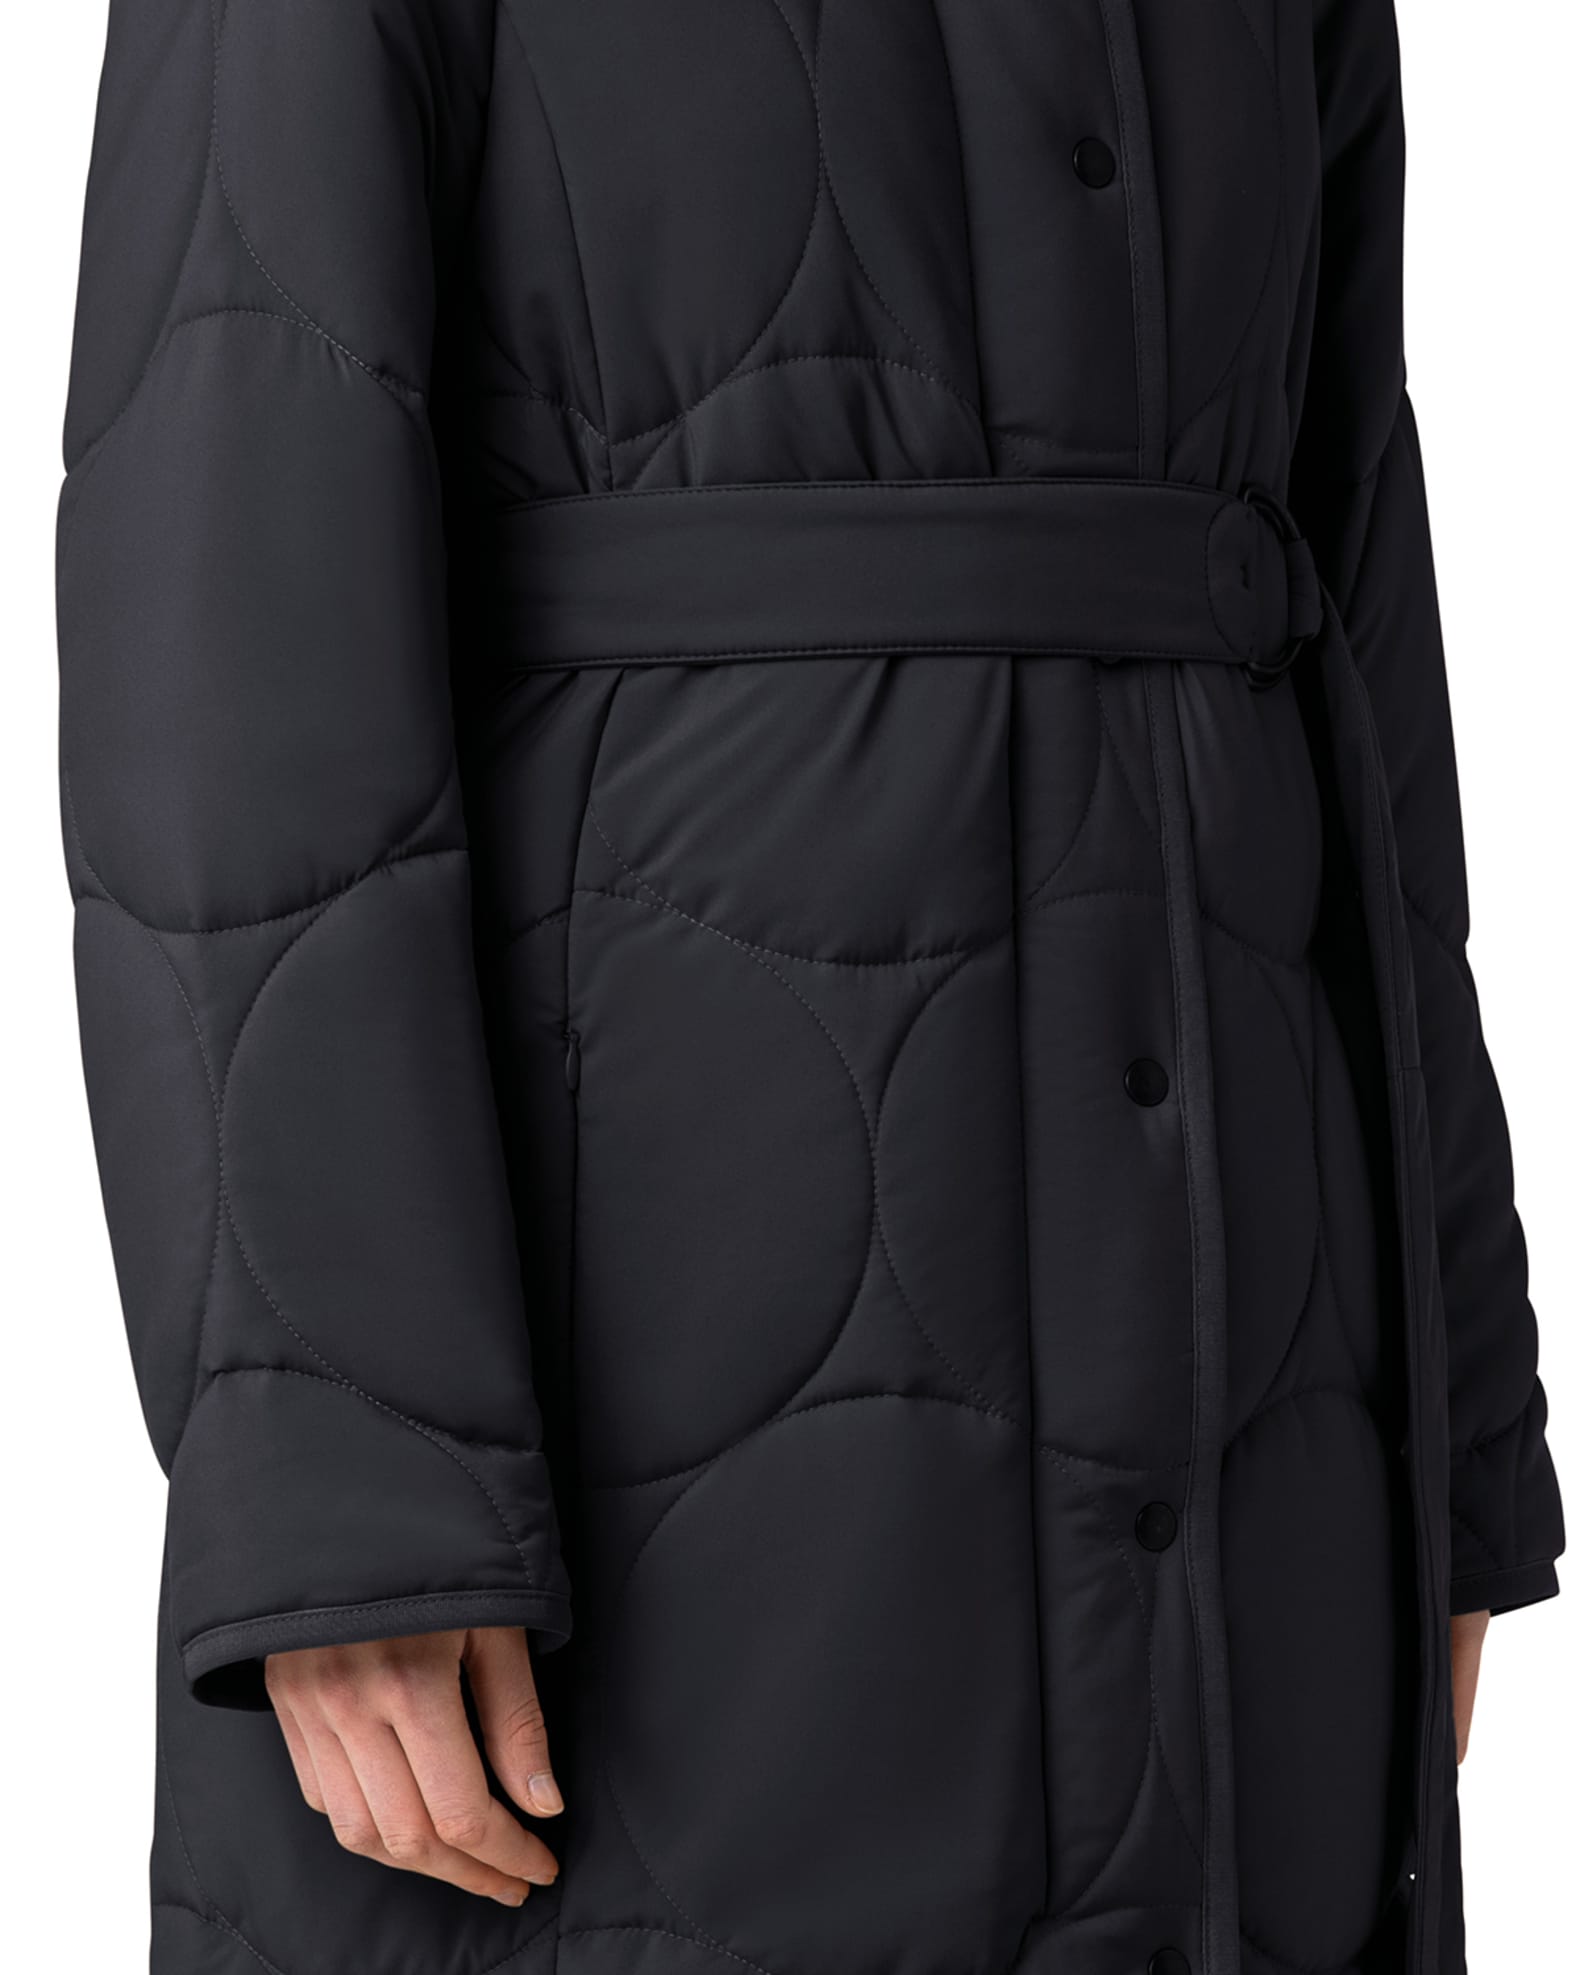 Akris punto Dot Quilted Belted Coat | Neiman Marcus